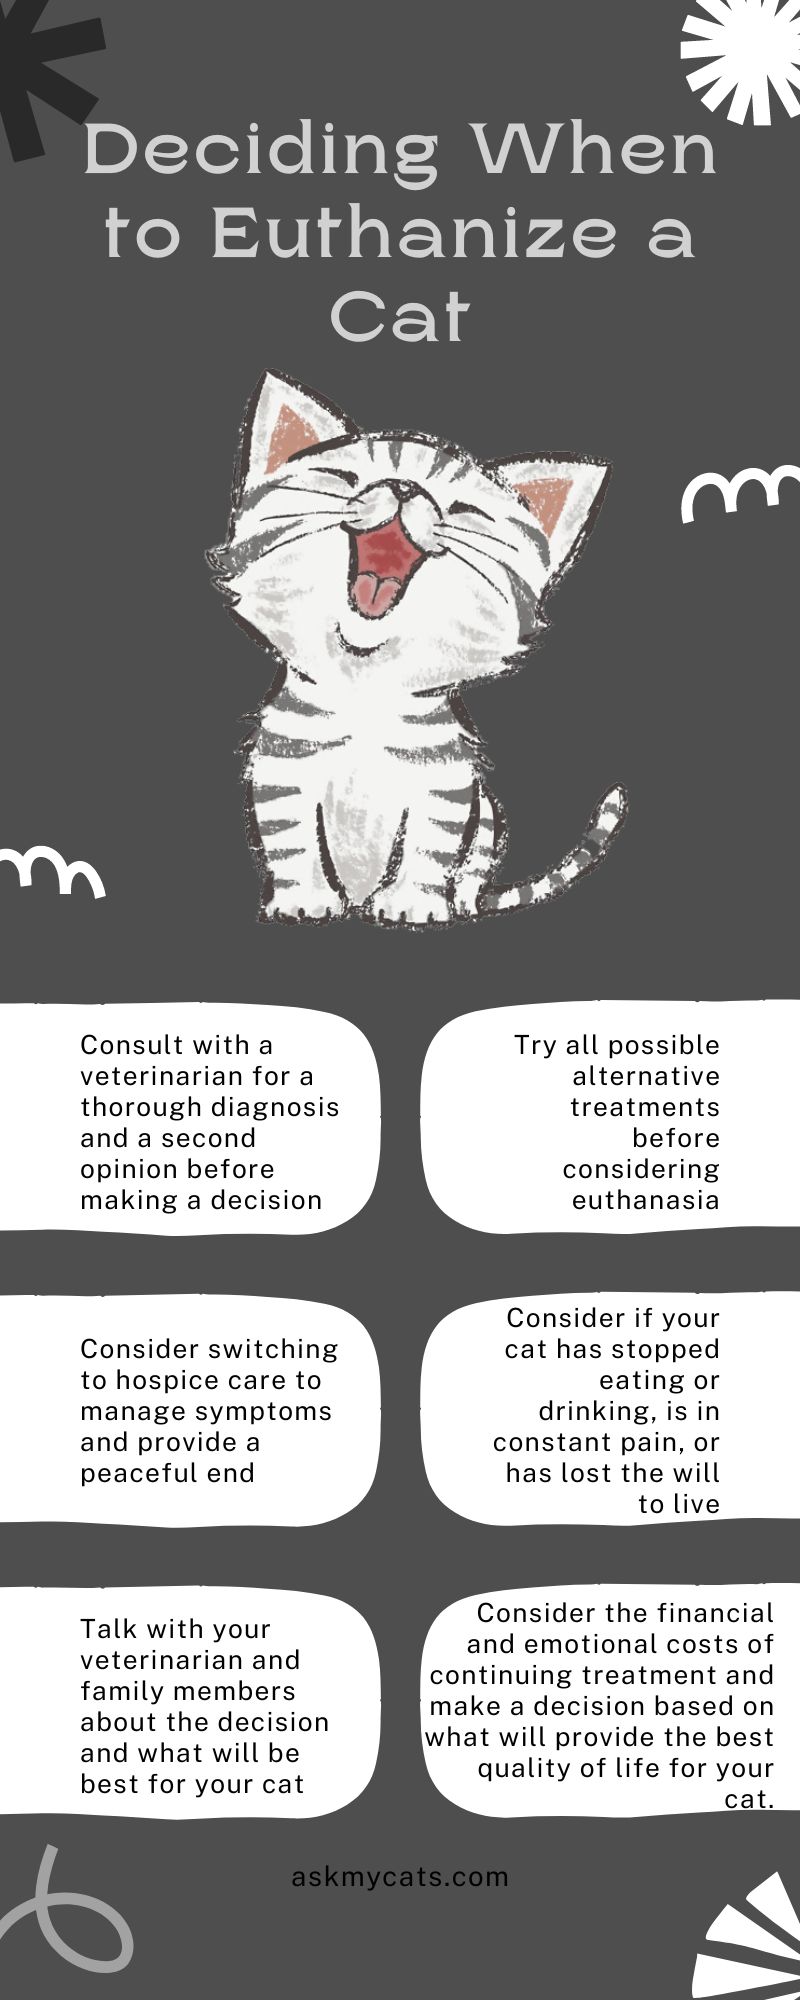 Deciding When to Euthanize a Cat (Infographic)